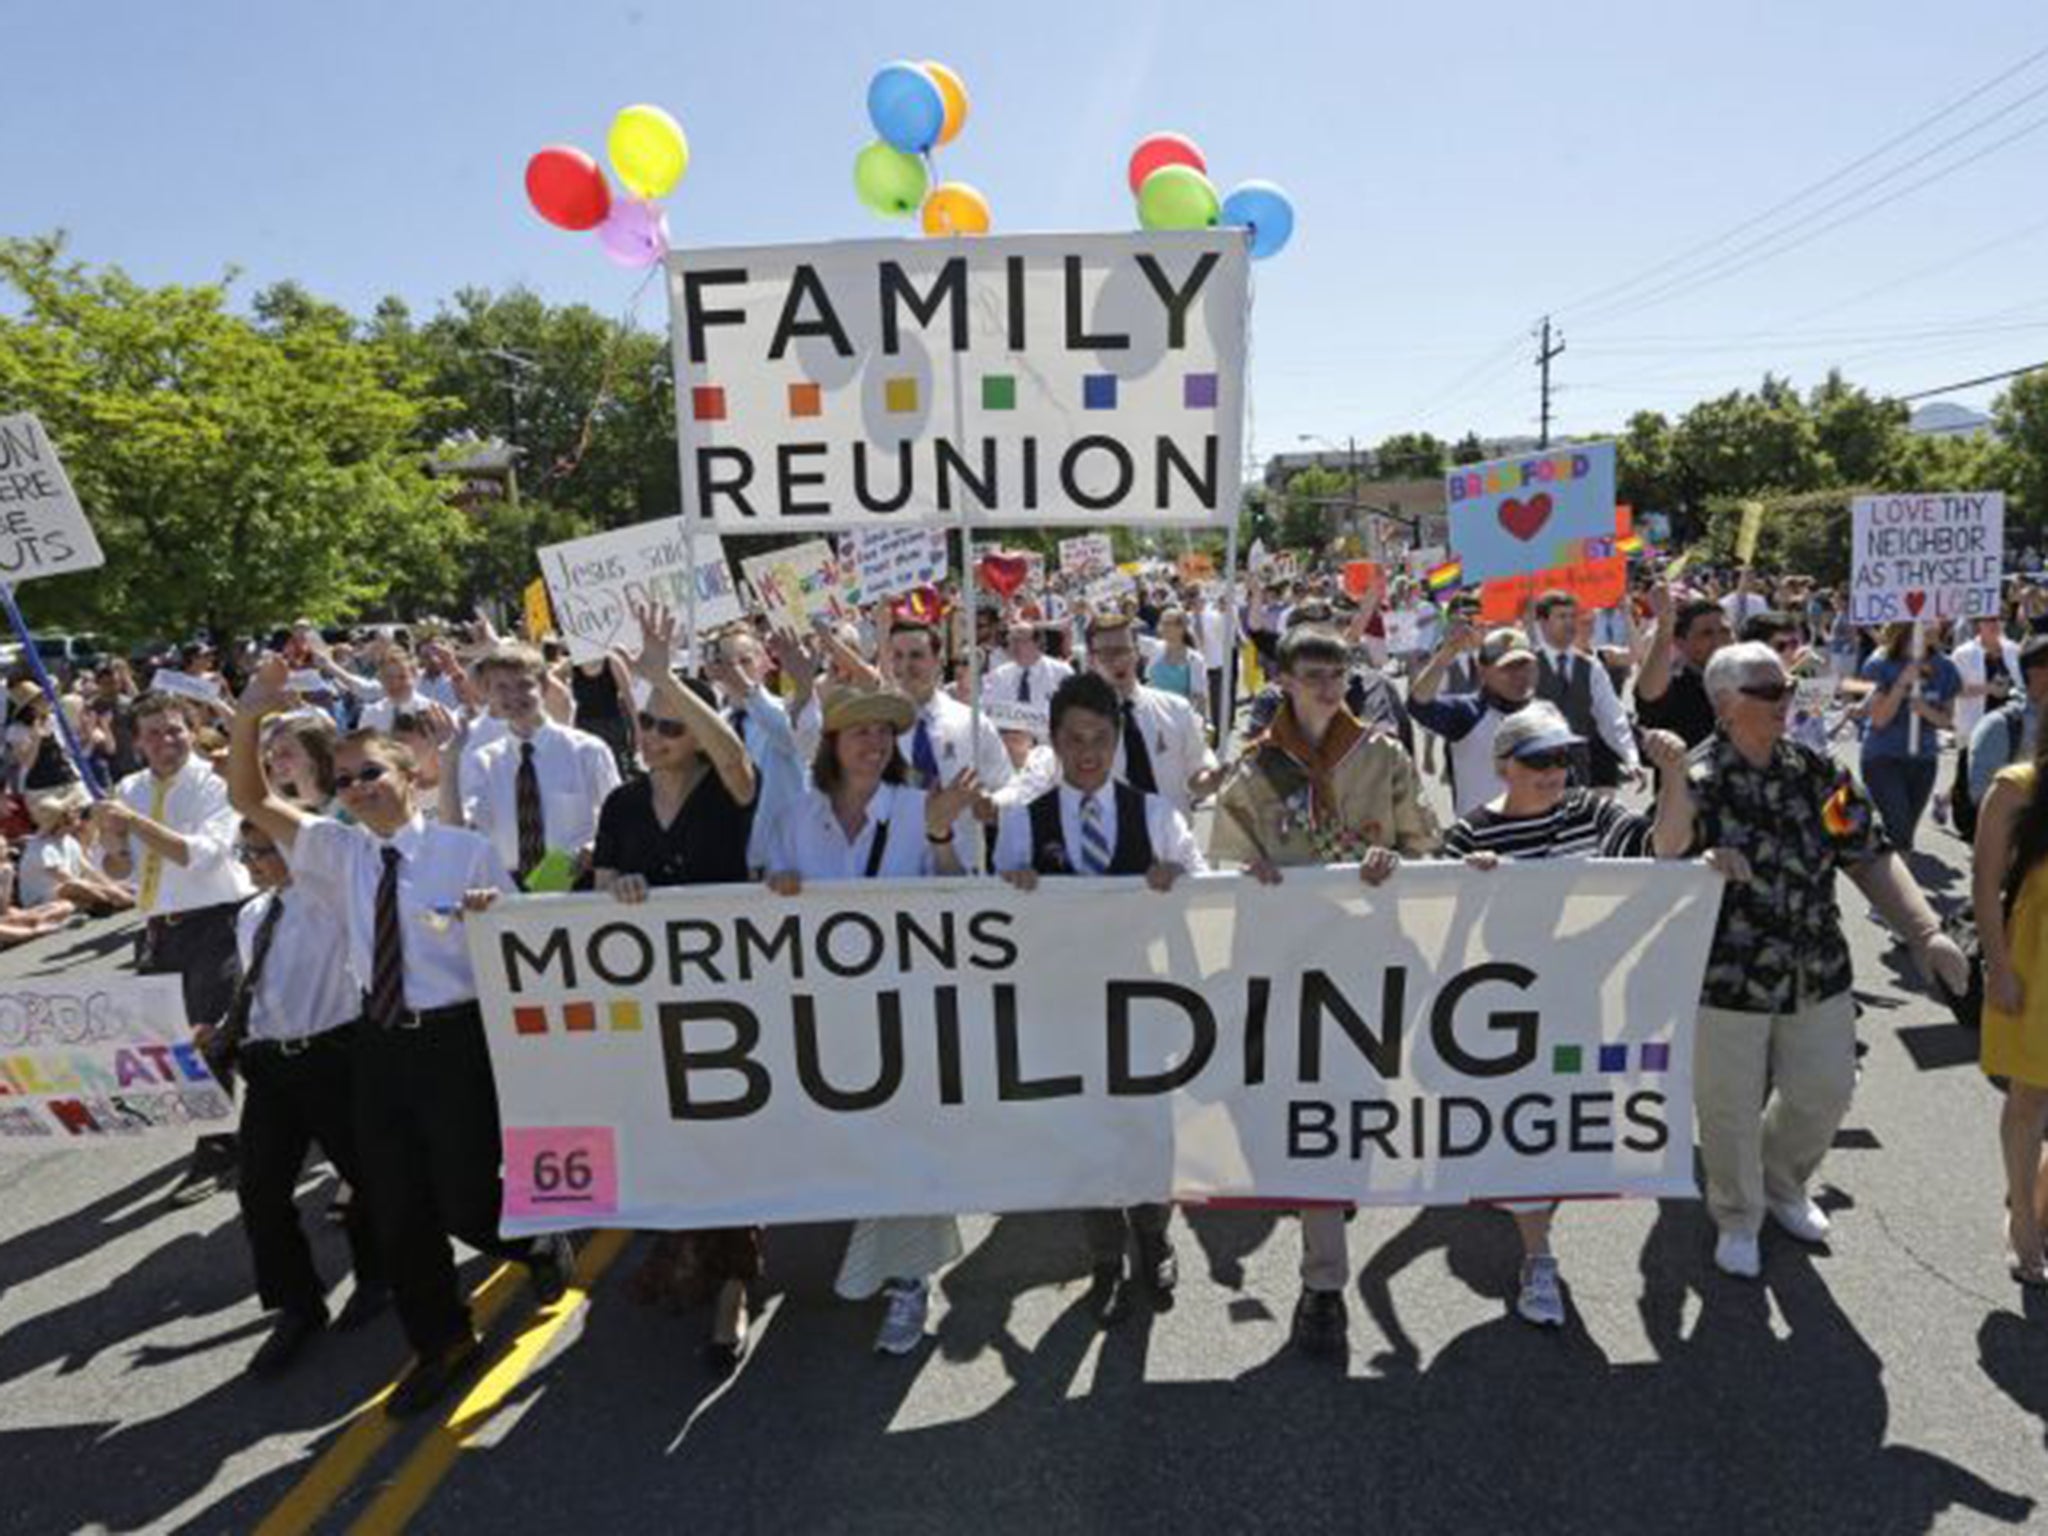 Mormons plan mass resignation event in protest over churchs same-sex marriage policy The Independent The Independent